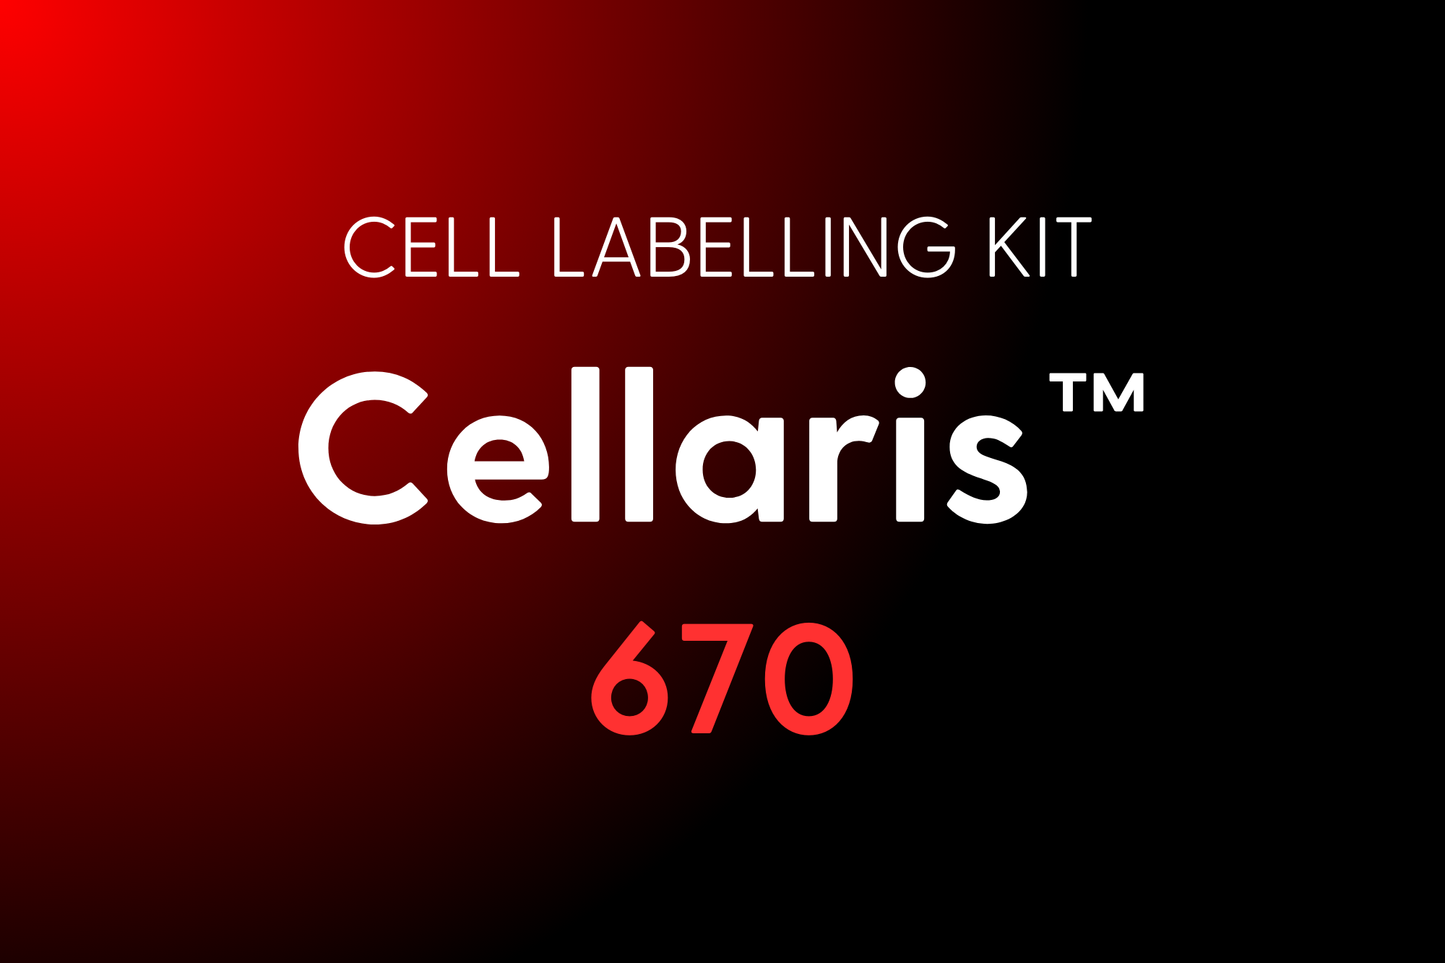 Cellaris™ 670 - Cell Labelling Kit (Red)